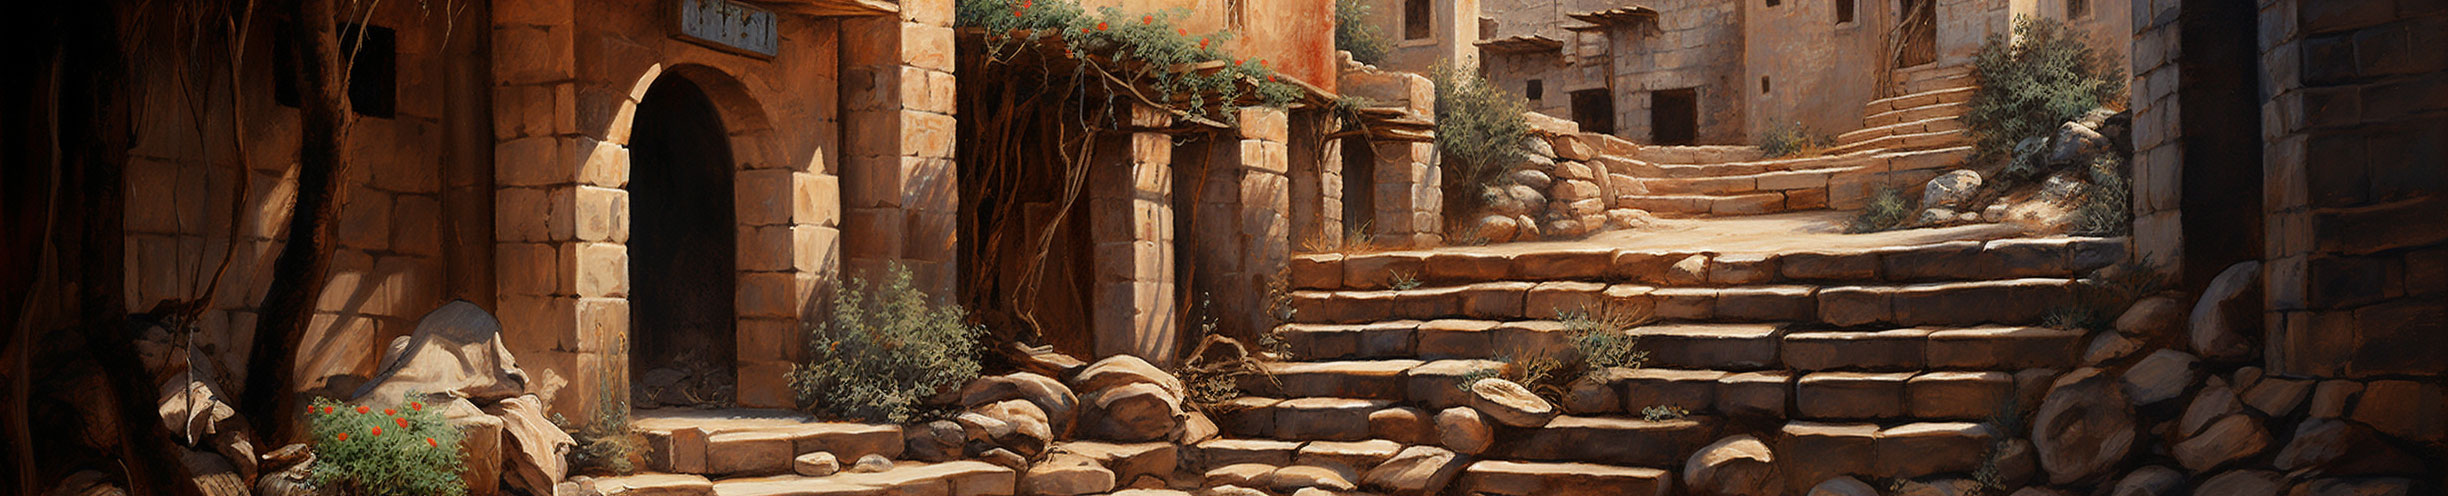 tychodreq_a_finely_detailed_oil_painting_of_a_stone_stairs_lead_cea3f758-c26a-4215-af34-672a6bb3188c.jpg